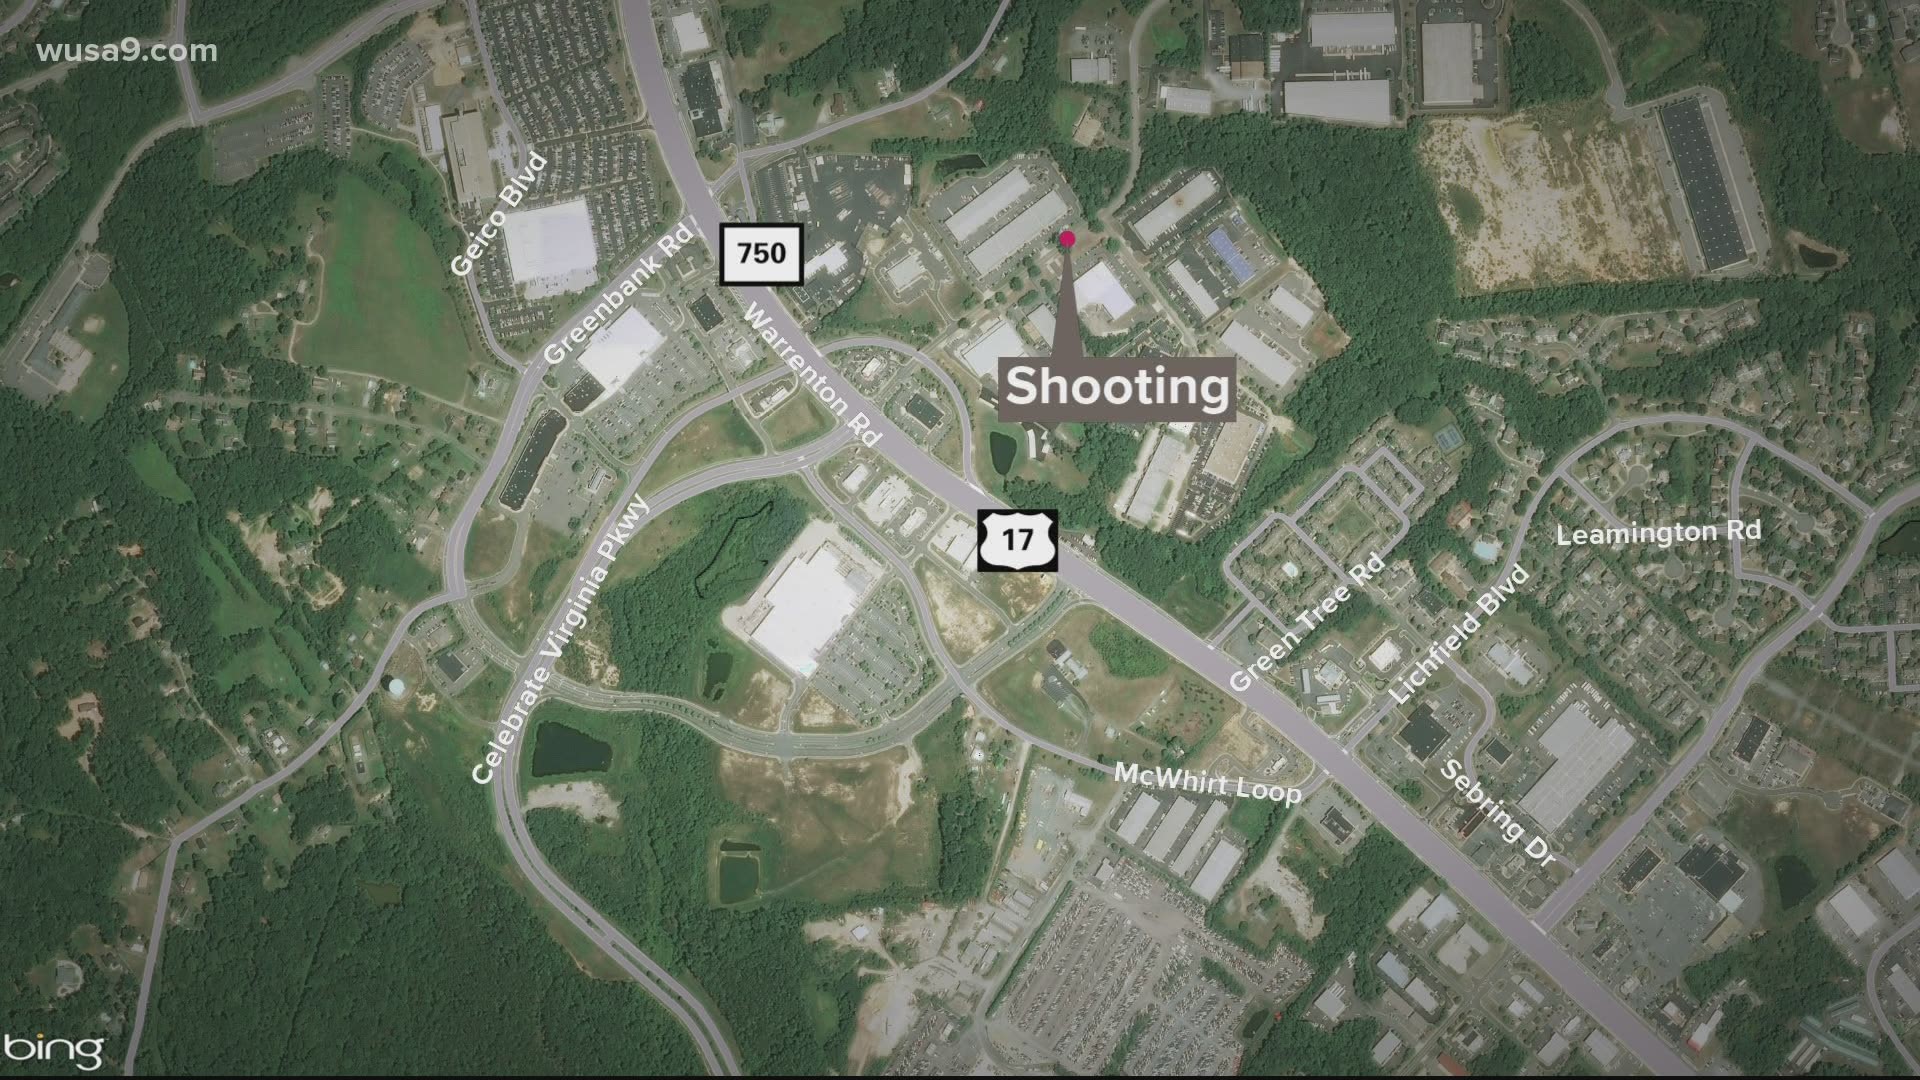 The shooting happened in the parking lot of the Tuckahoe Motorcycle Club clubhouse.